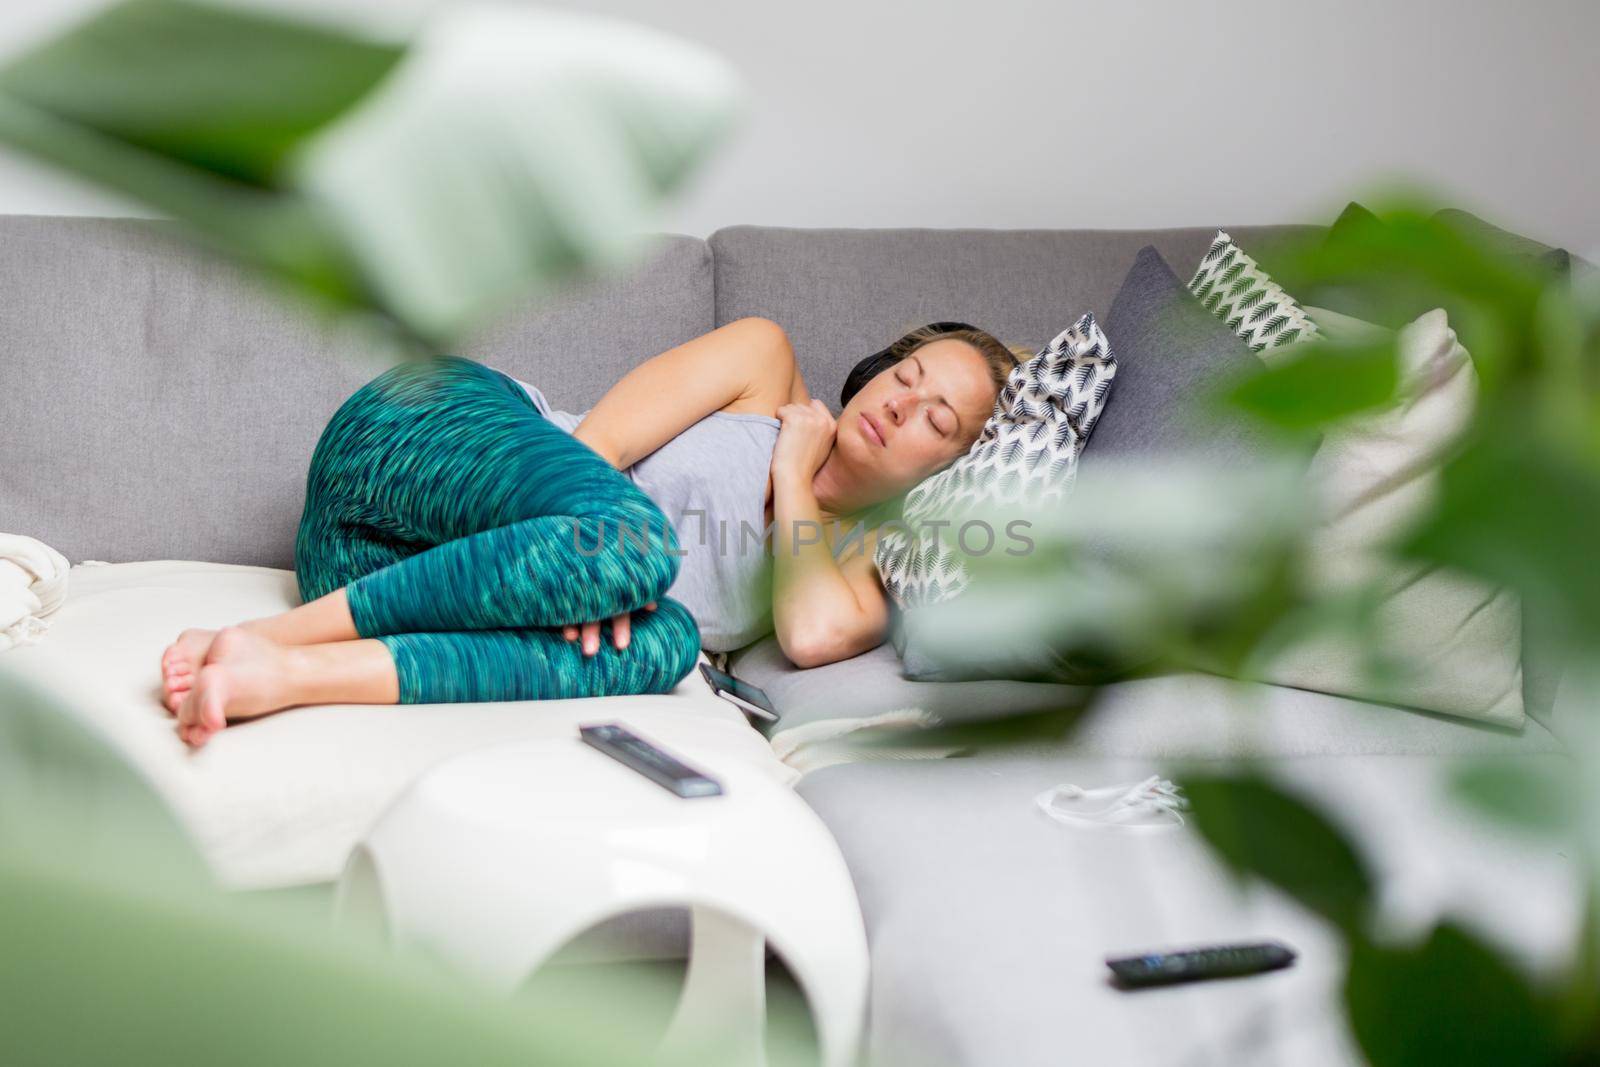 Young casual woman lying on couch cushion with eyes closed, relaxing on cozy sofa pillow, relaxed girl taking nap at home, wearing headphones, listening to music or podcast